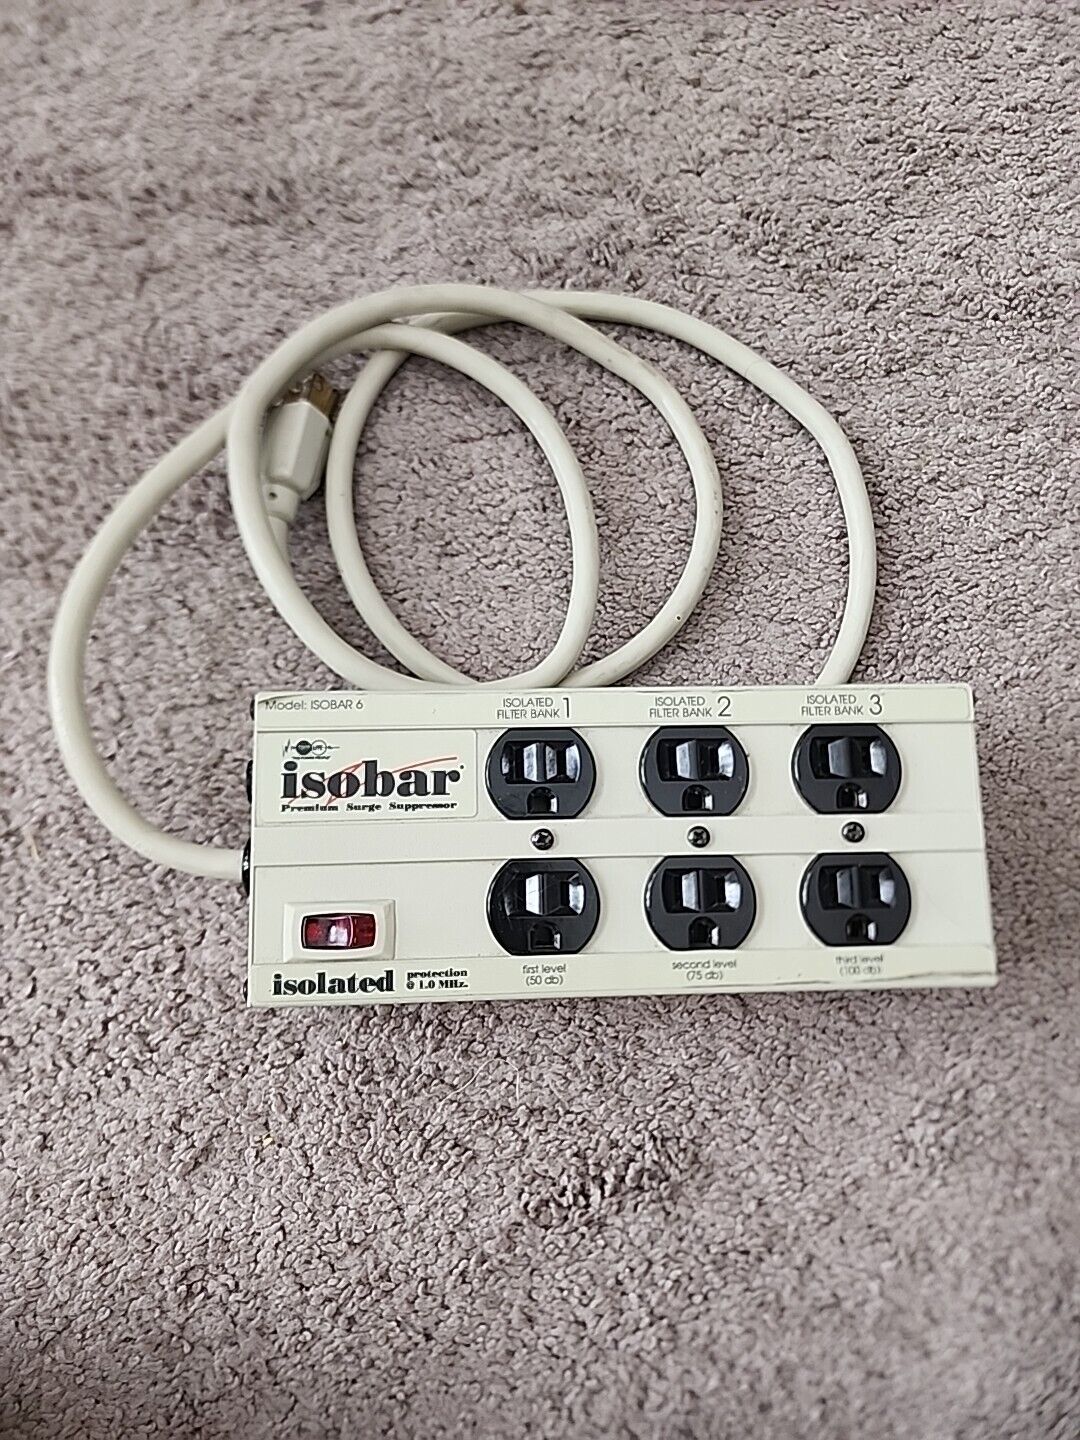 Tripp Lite Isobar 6 Outlet 120V Surge Suppressor Tested all 6 Plugs, Working